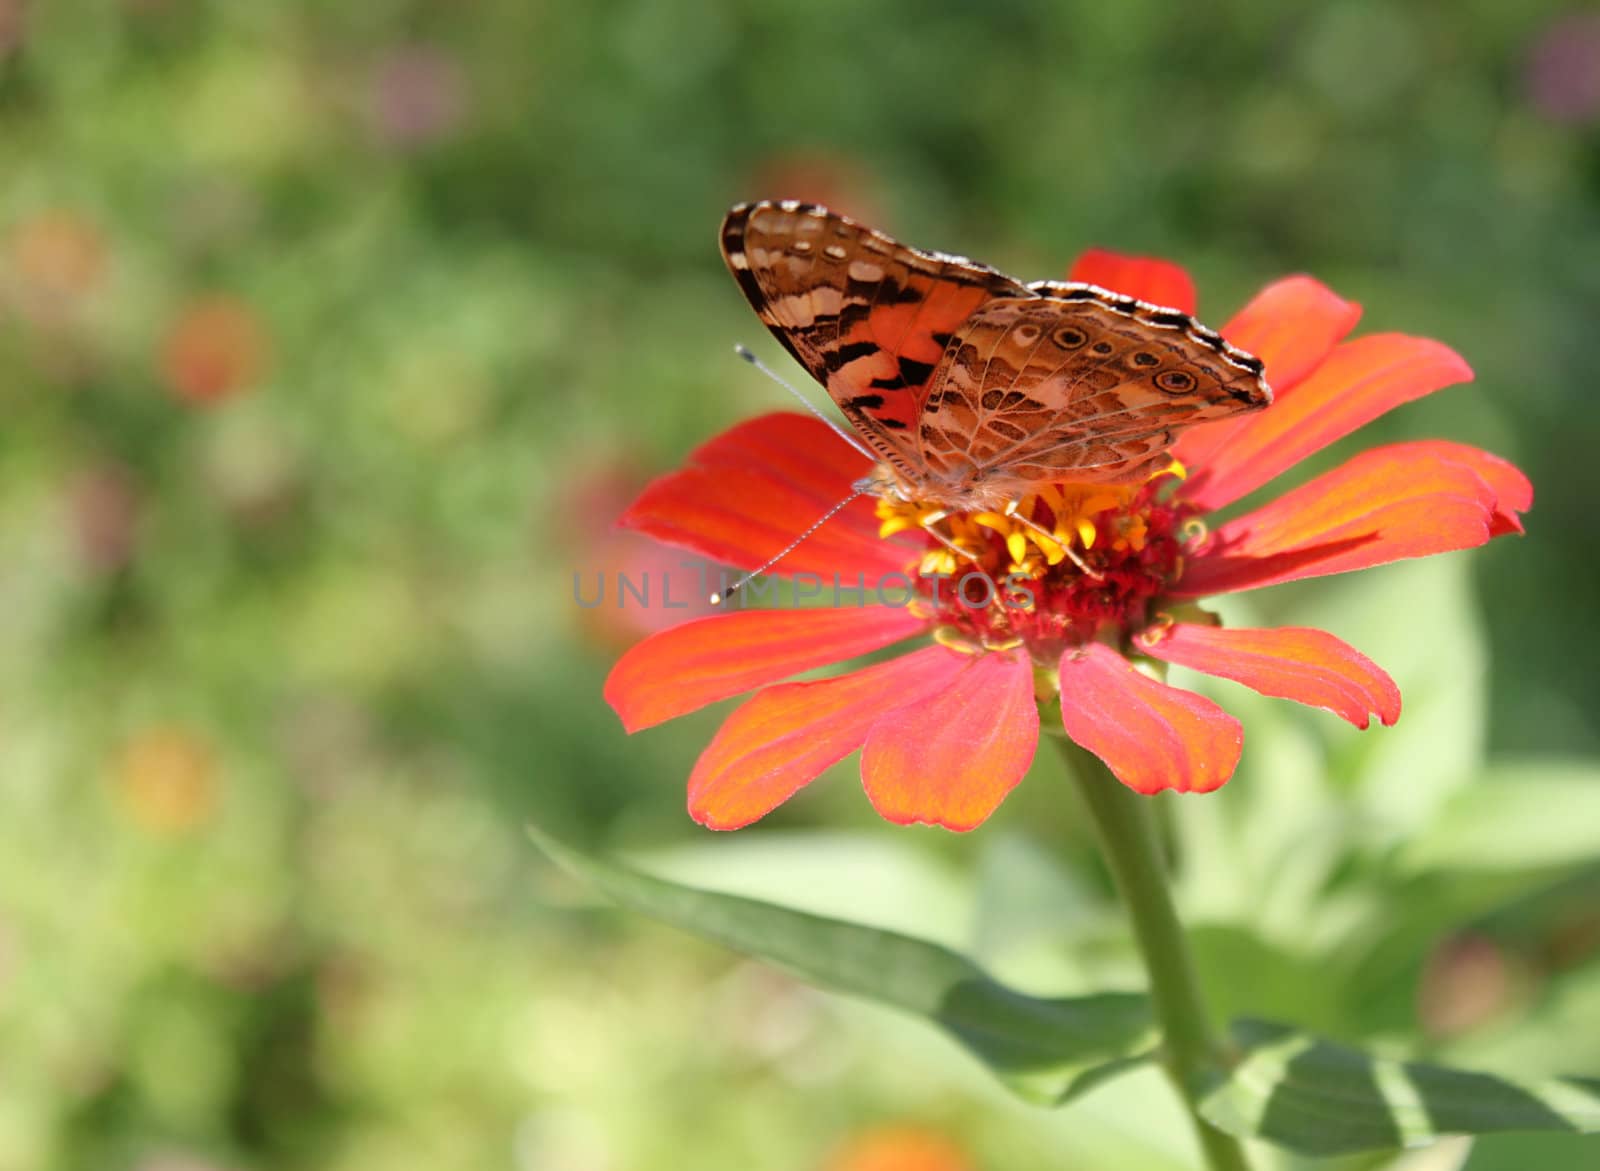 butterfly (Painted Lady) sitting on flower (zinnia)